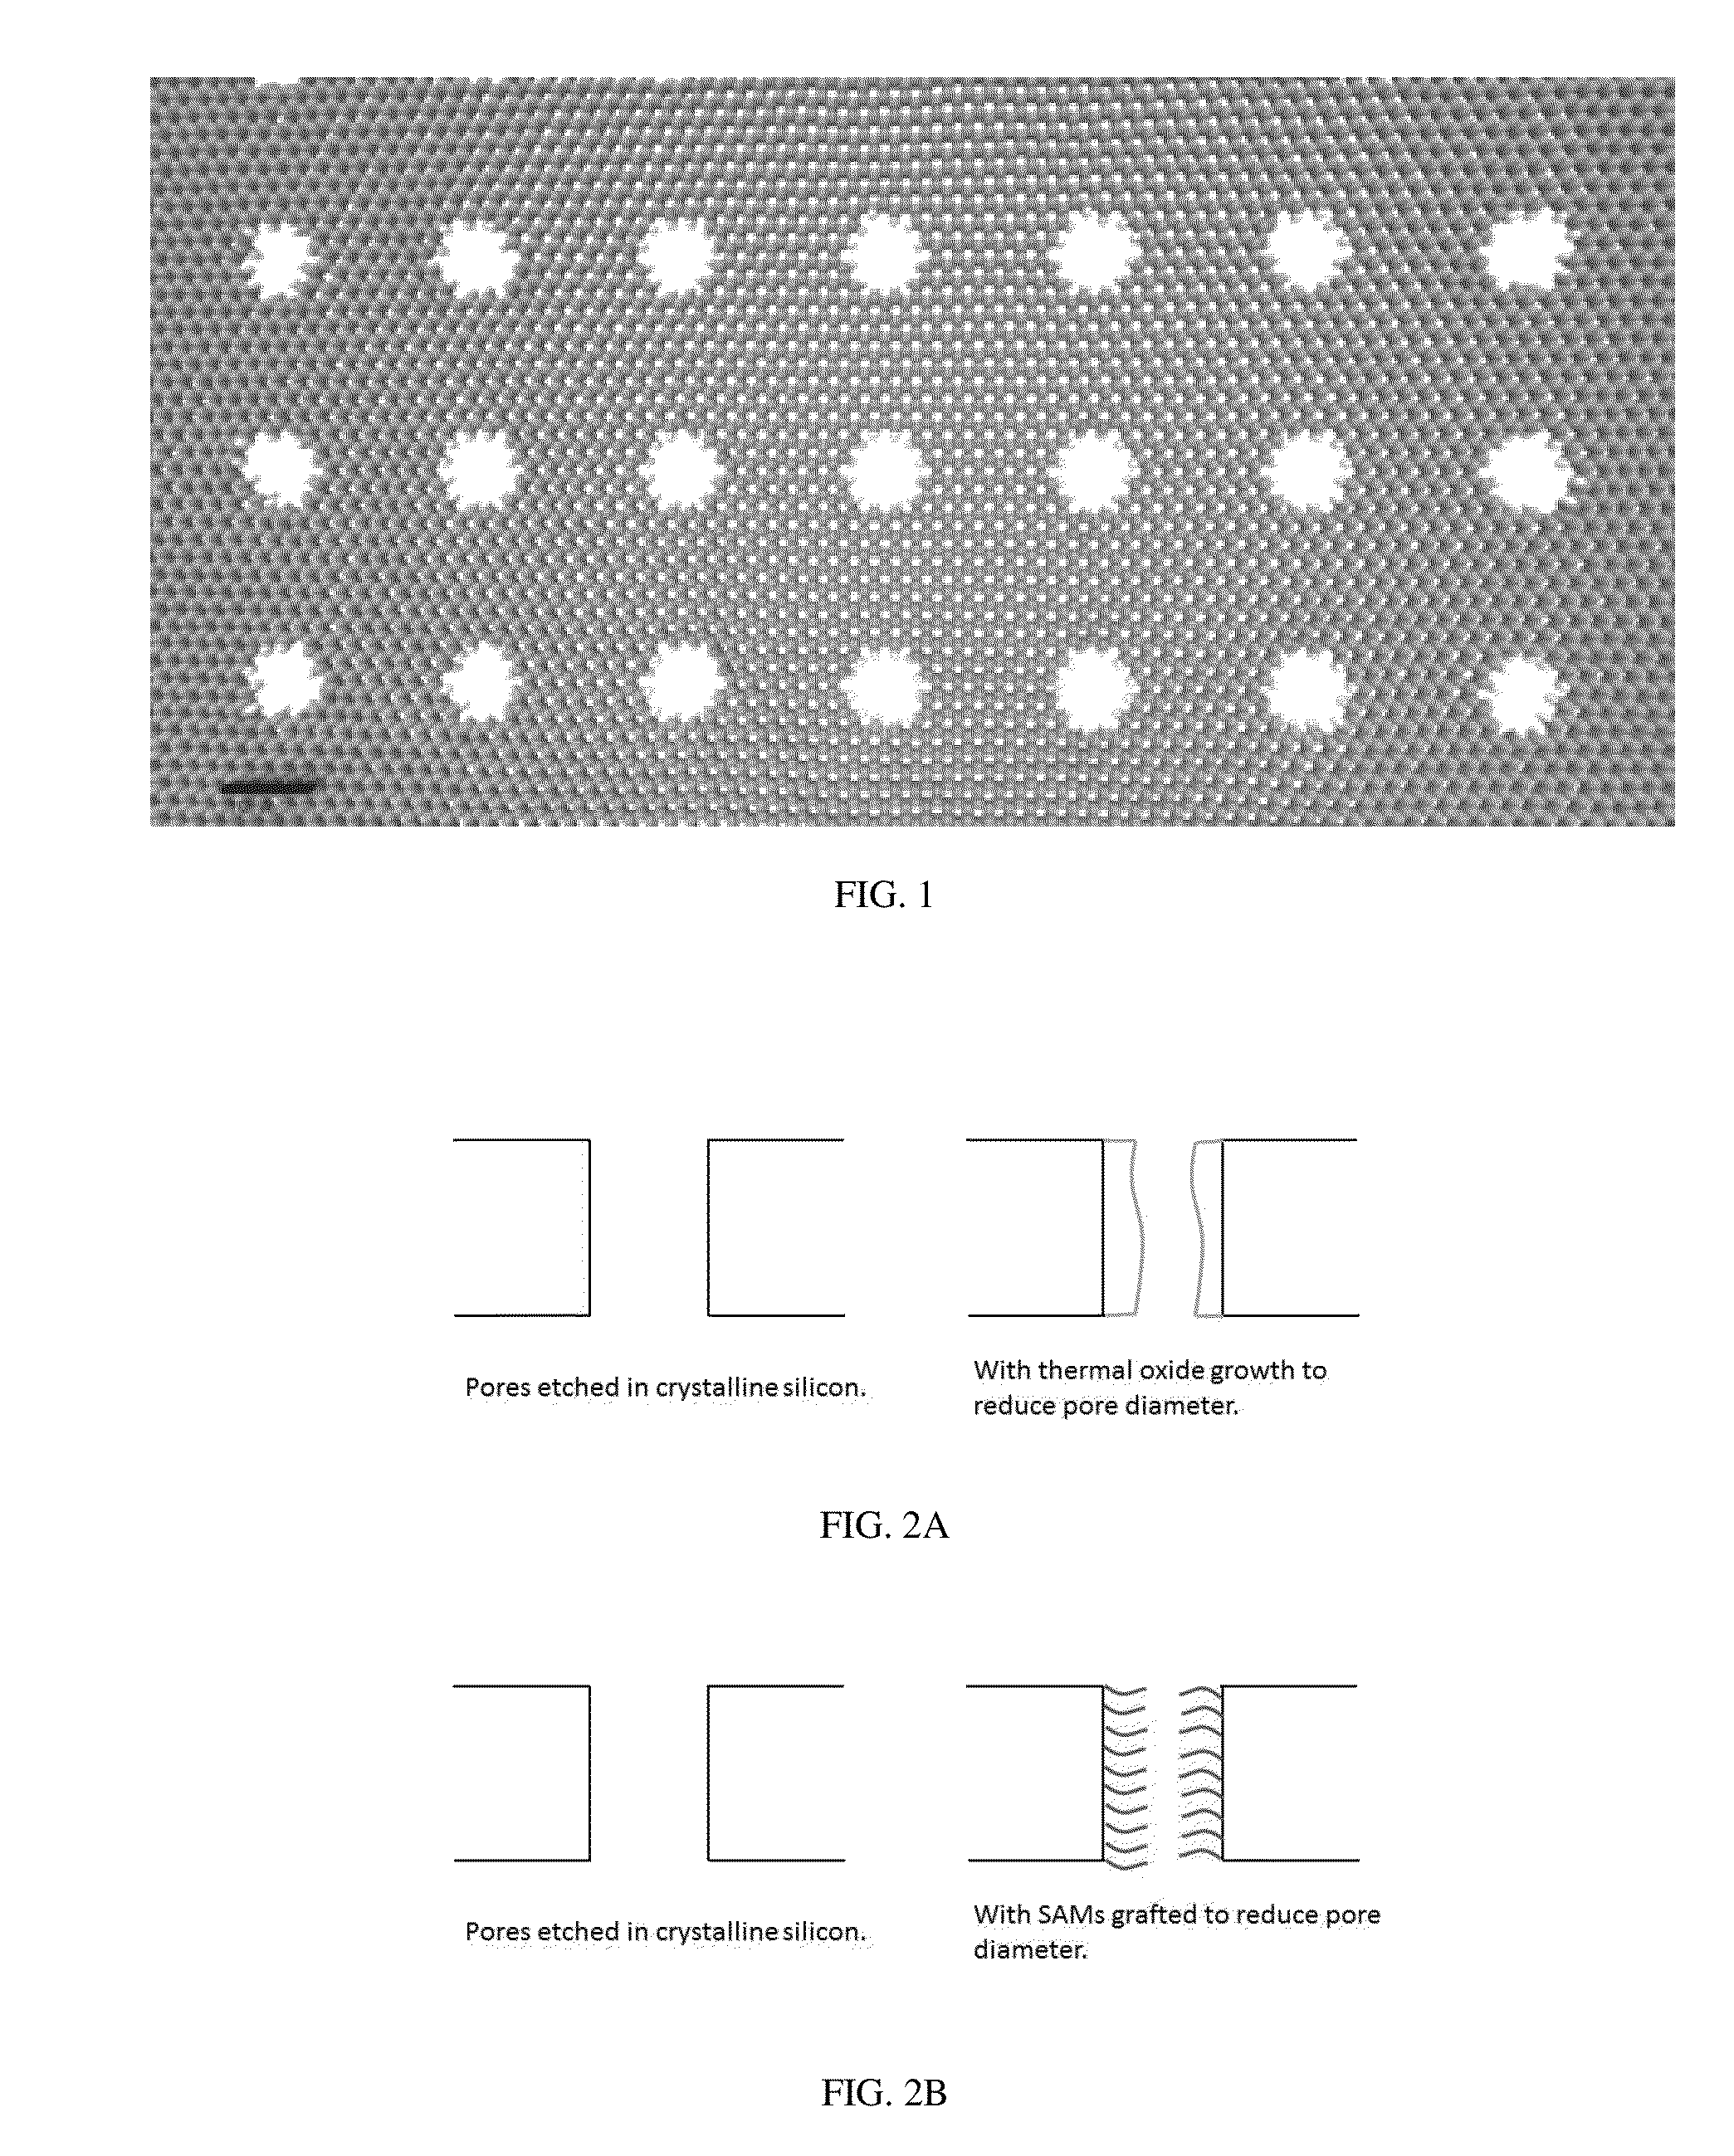 Porous materials and methods including nanoporous materials for water filtration